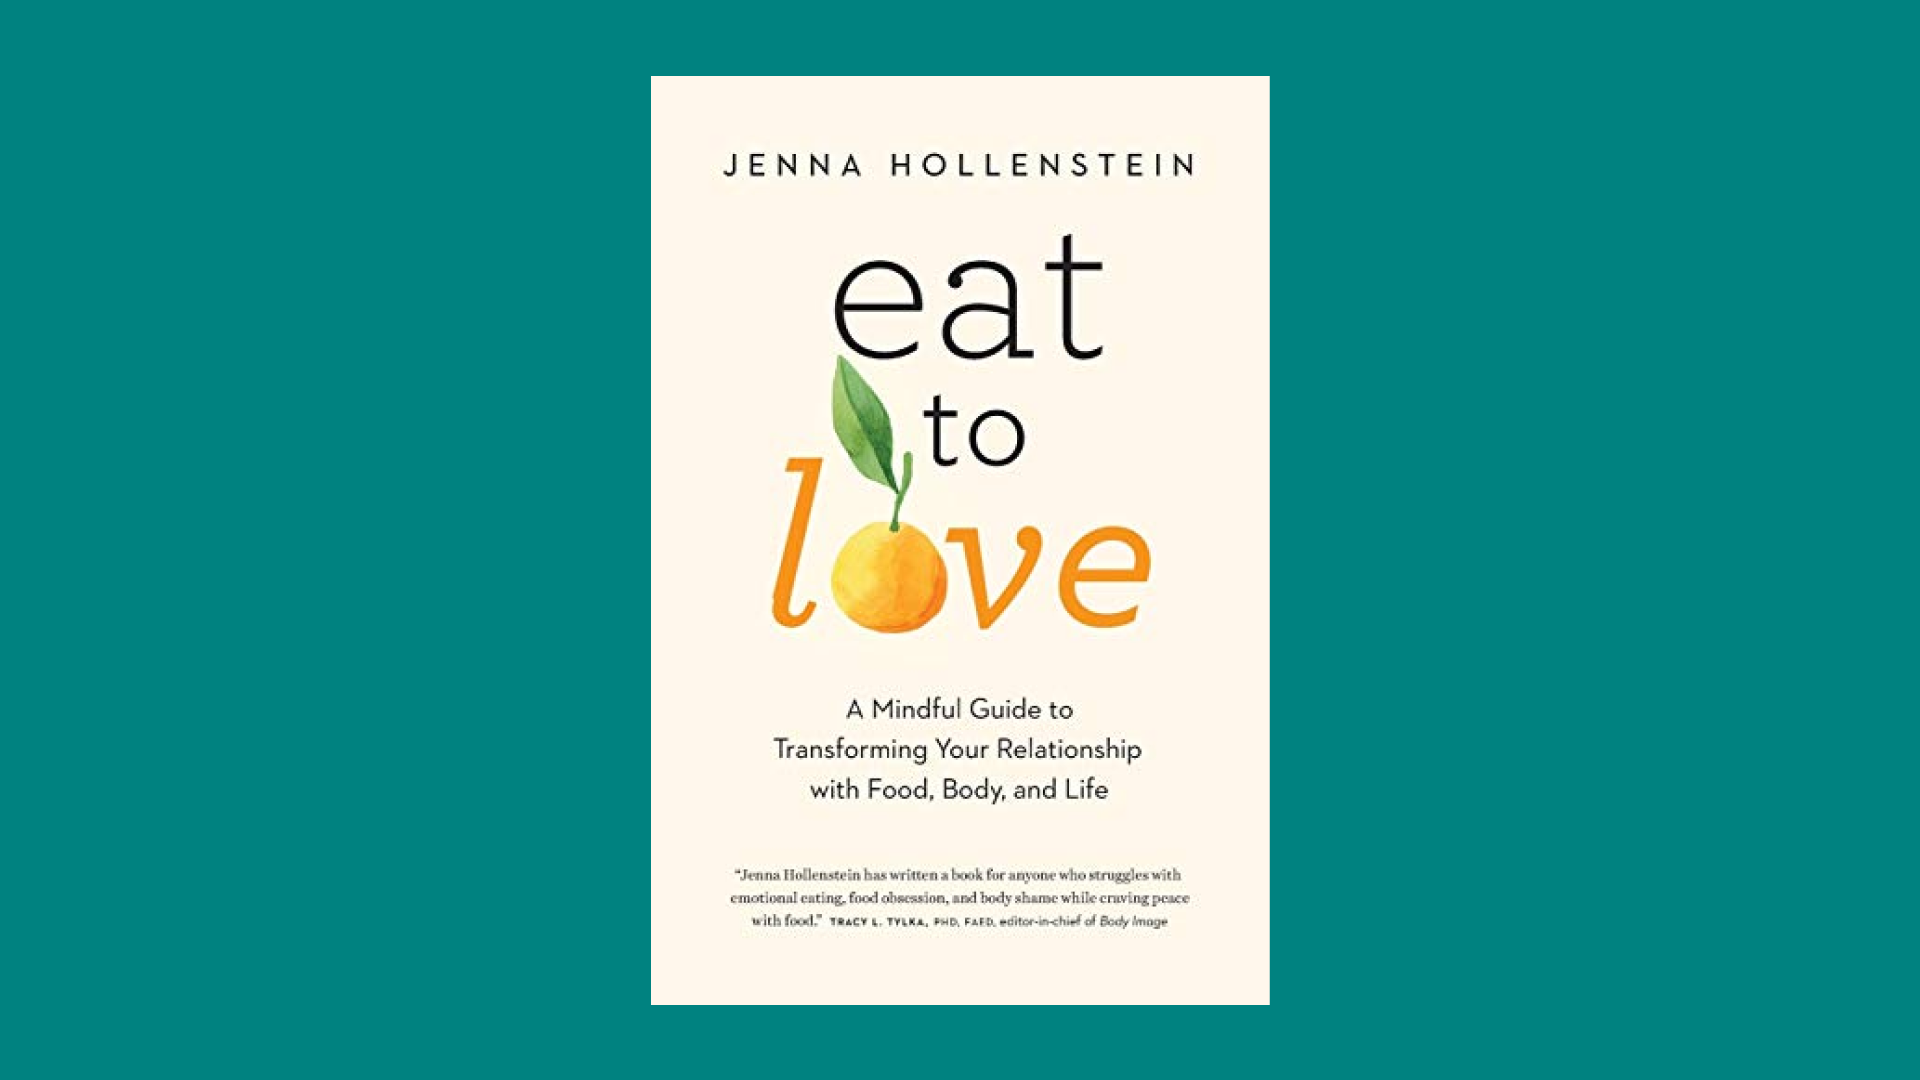  “Eat to Love: A Mindful Guide to Transforming Your Relationship With Food, Body, and Life” by Jenna Hollenstein